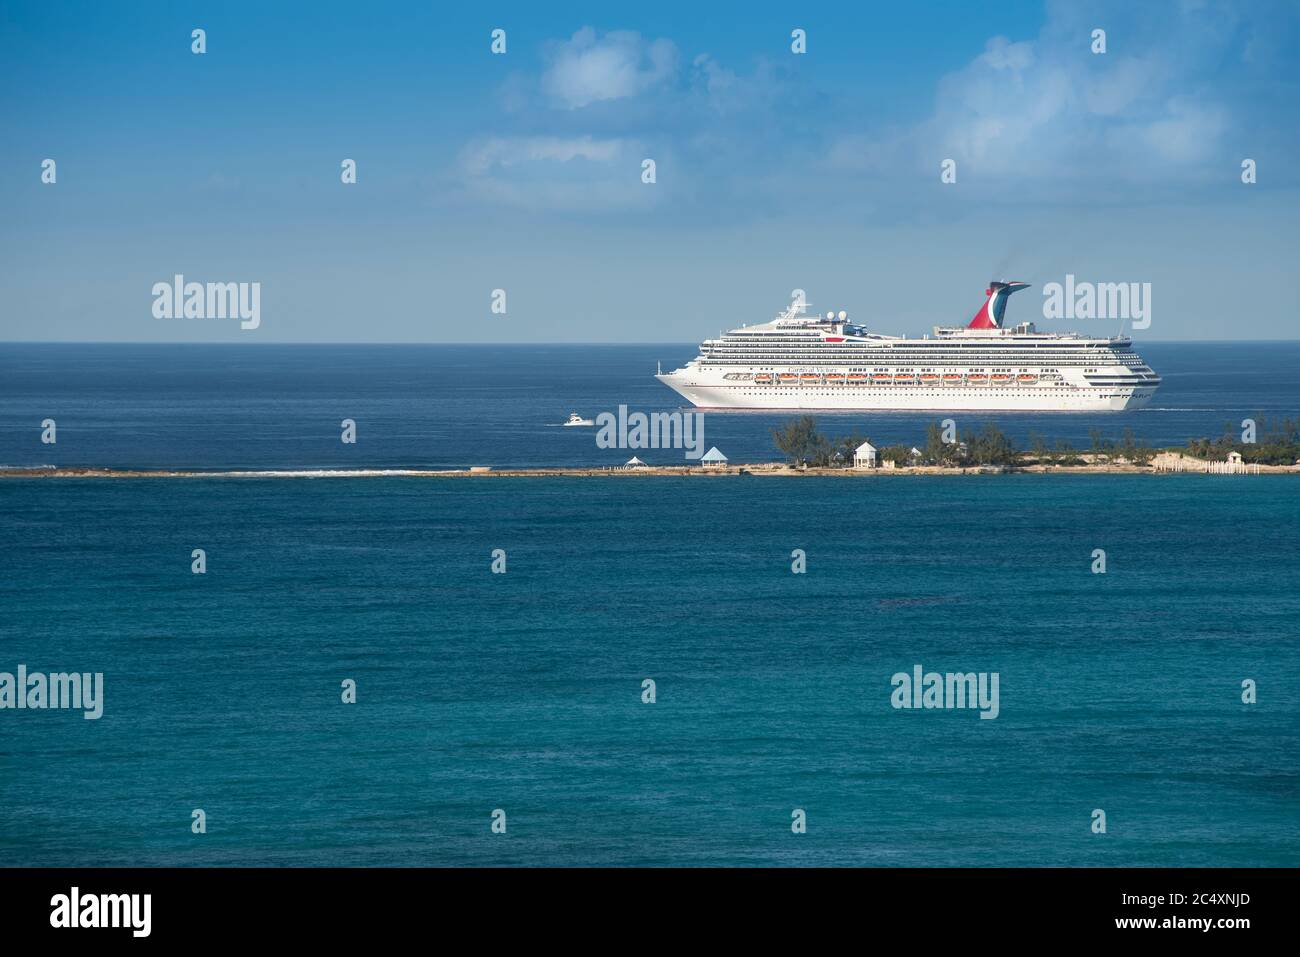 Nassau, Bahamas - March 1, 2018:  Carnival Cruise Lines ship departing from the popular destination and tropical port of Nassau. Stock Photo